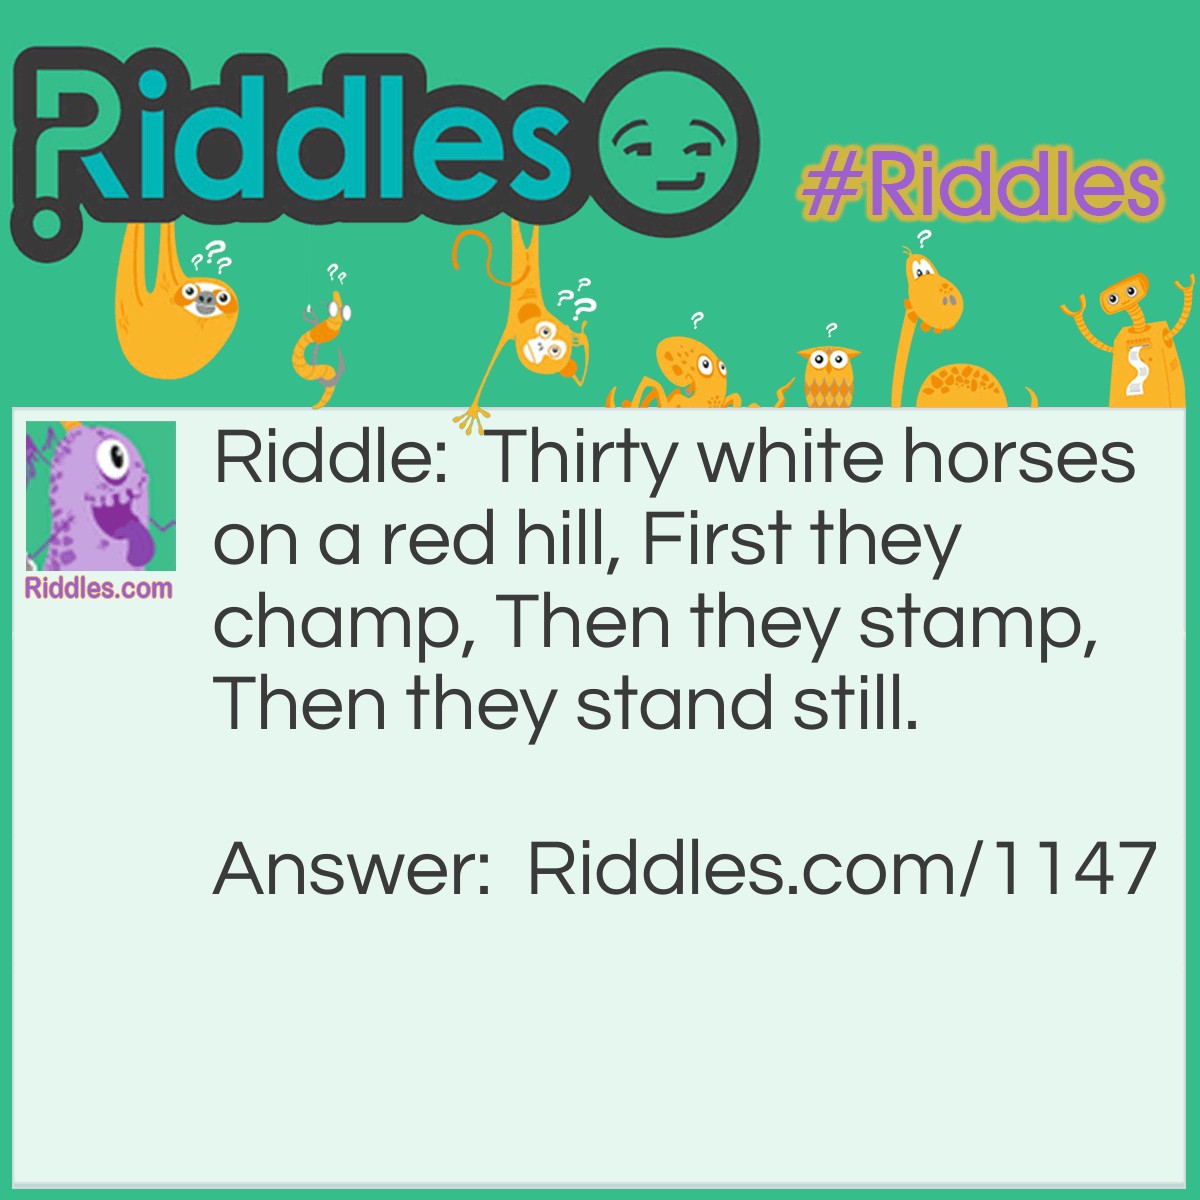 Riddle: Thirty white horses on a red hill, First they champ, Then they stamp, Then they stand still. What are they? Answer: Teeth.